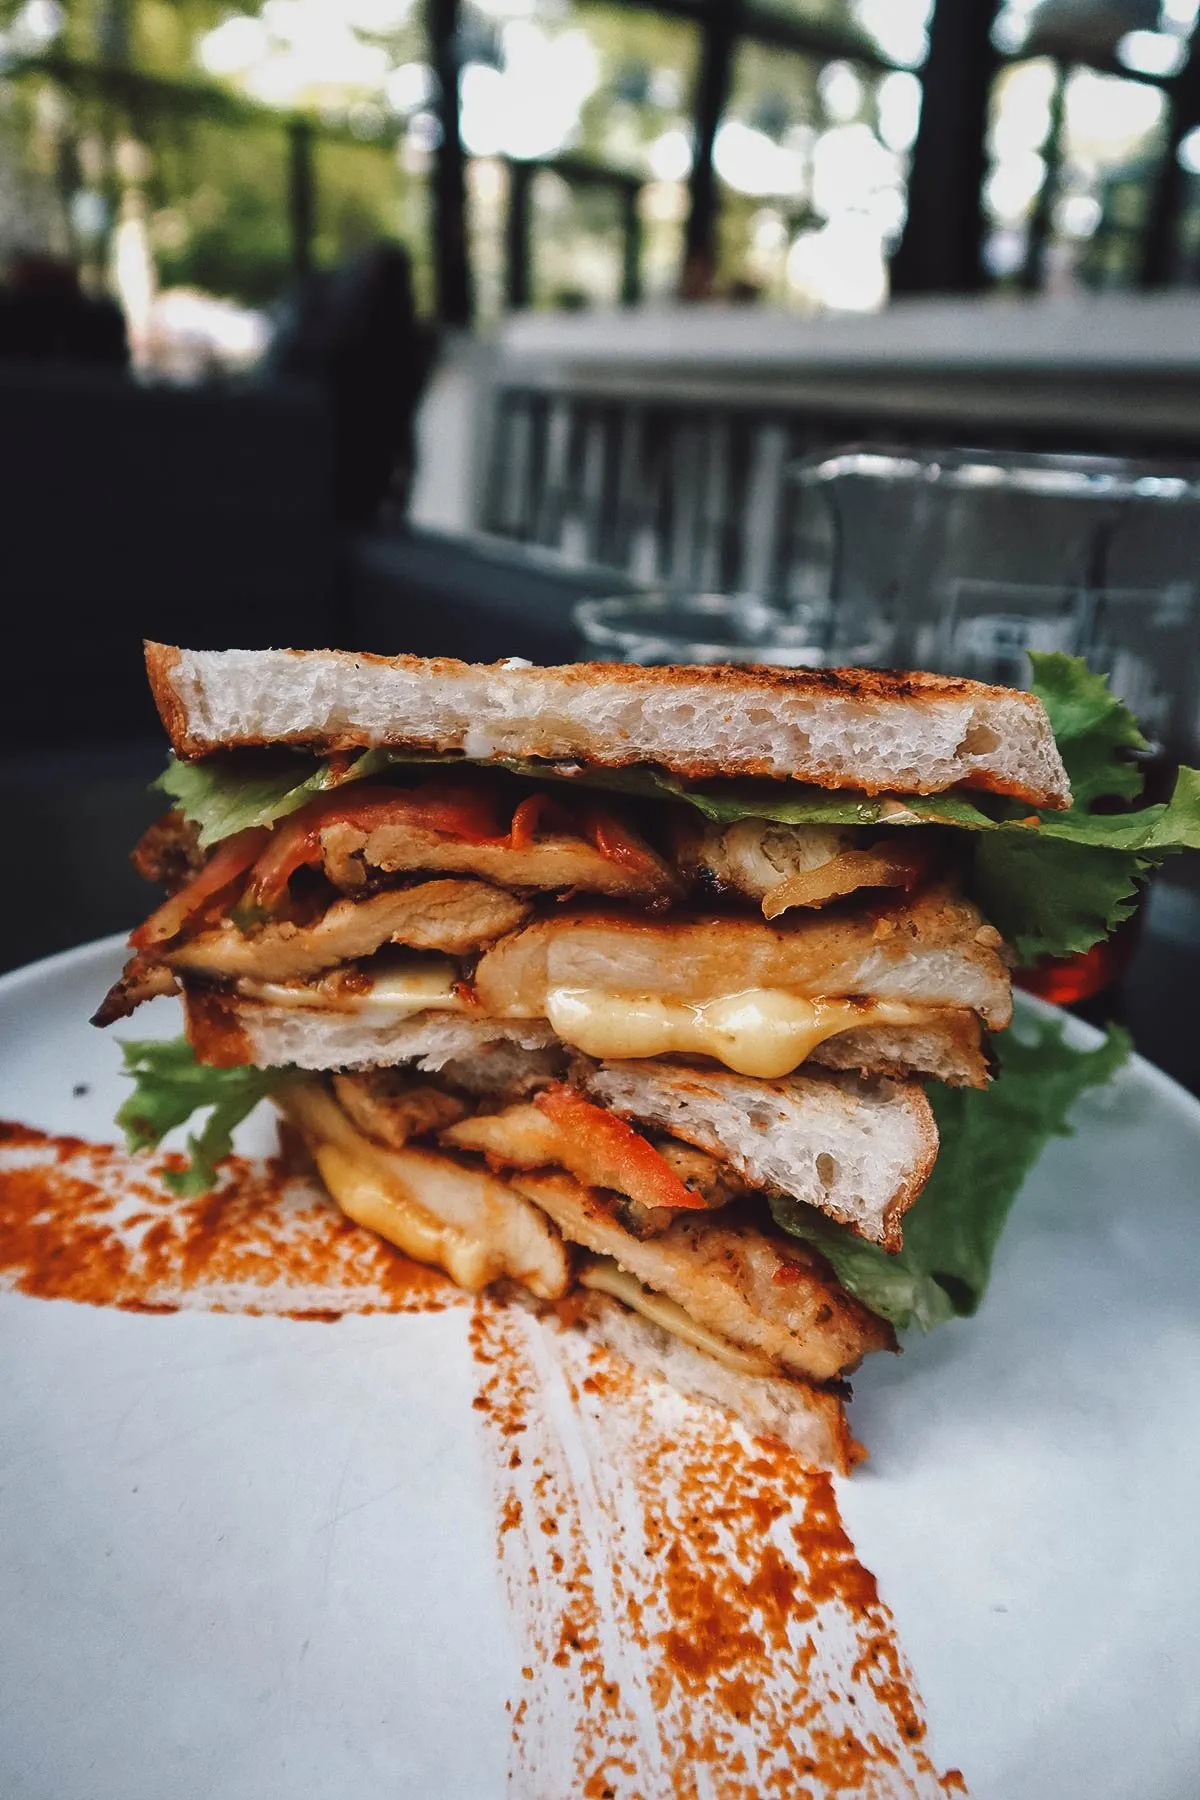 Sandwich at a cafe in Danang, Vietnam